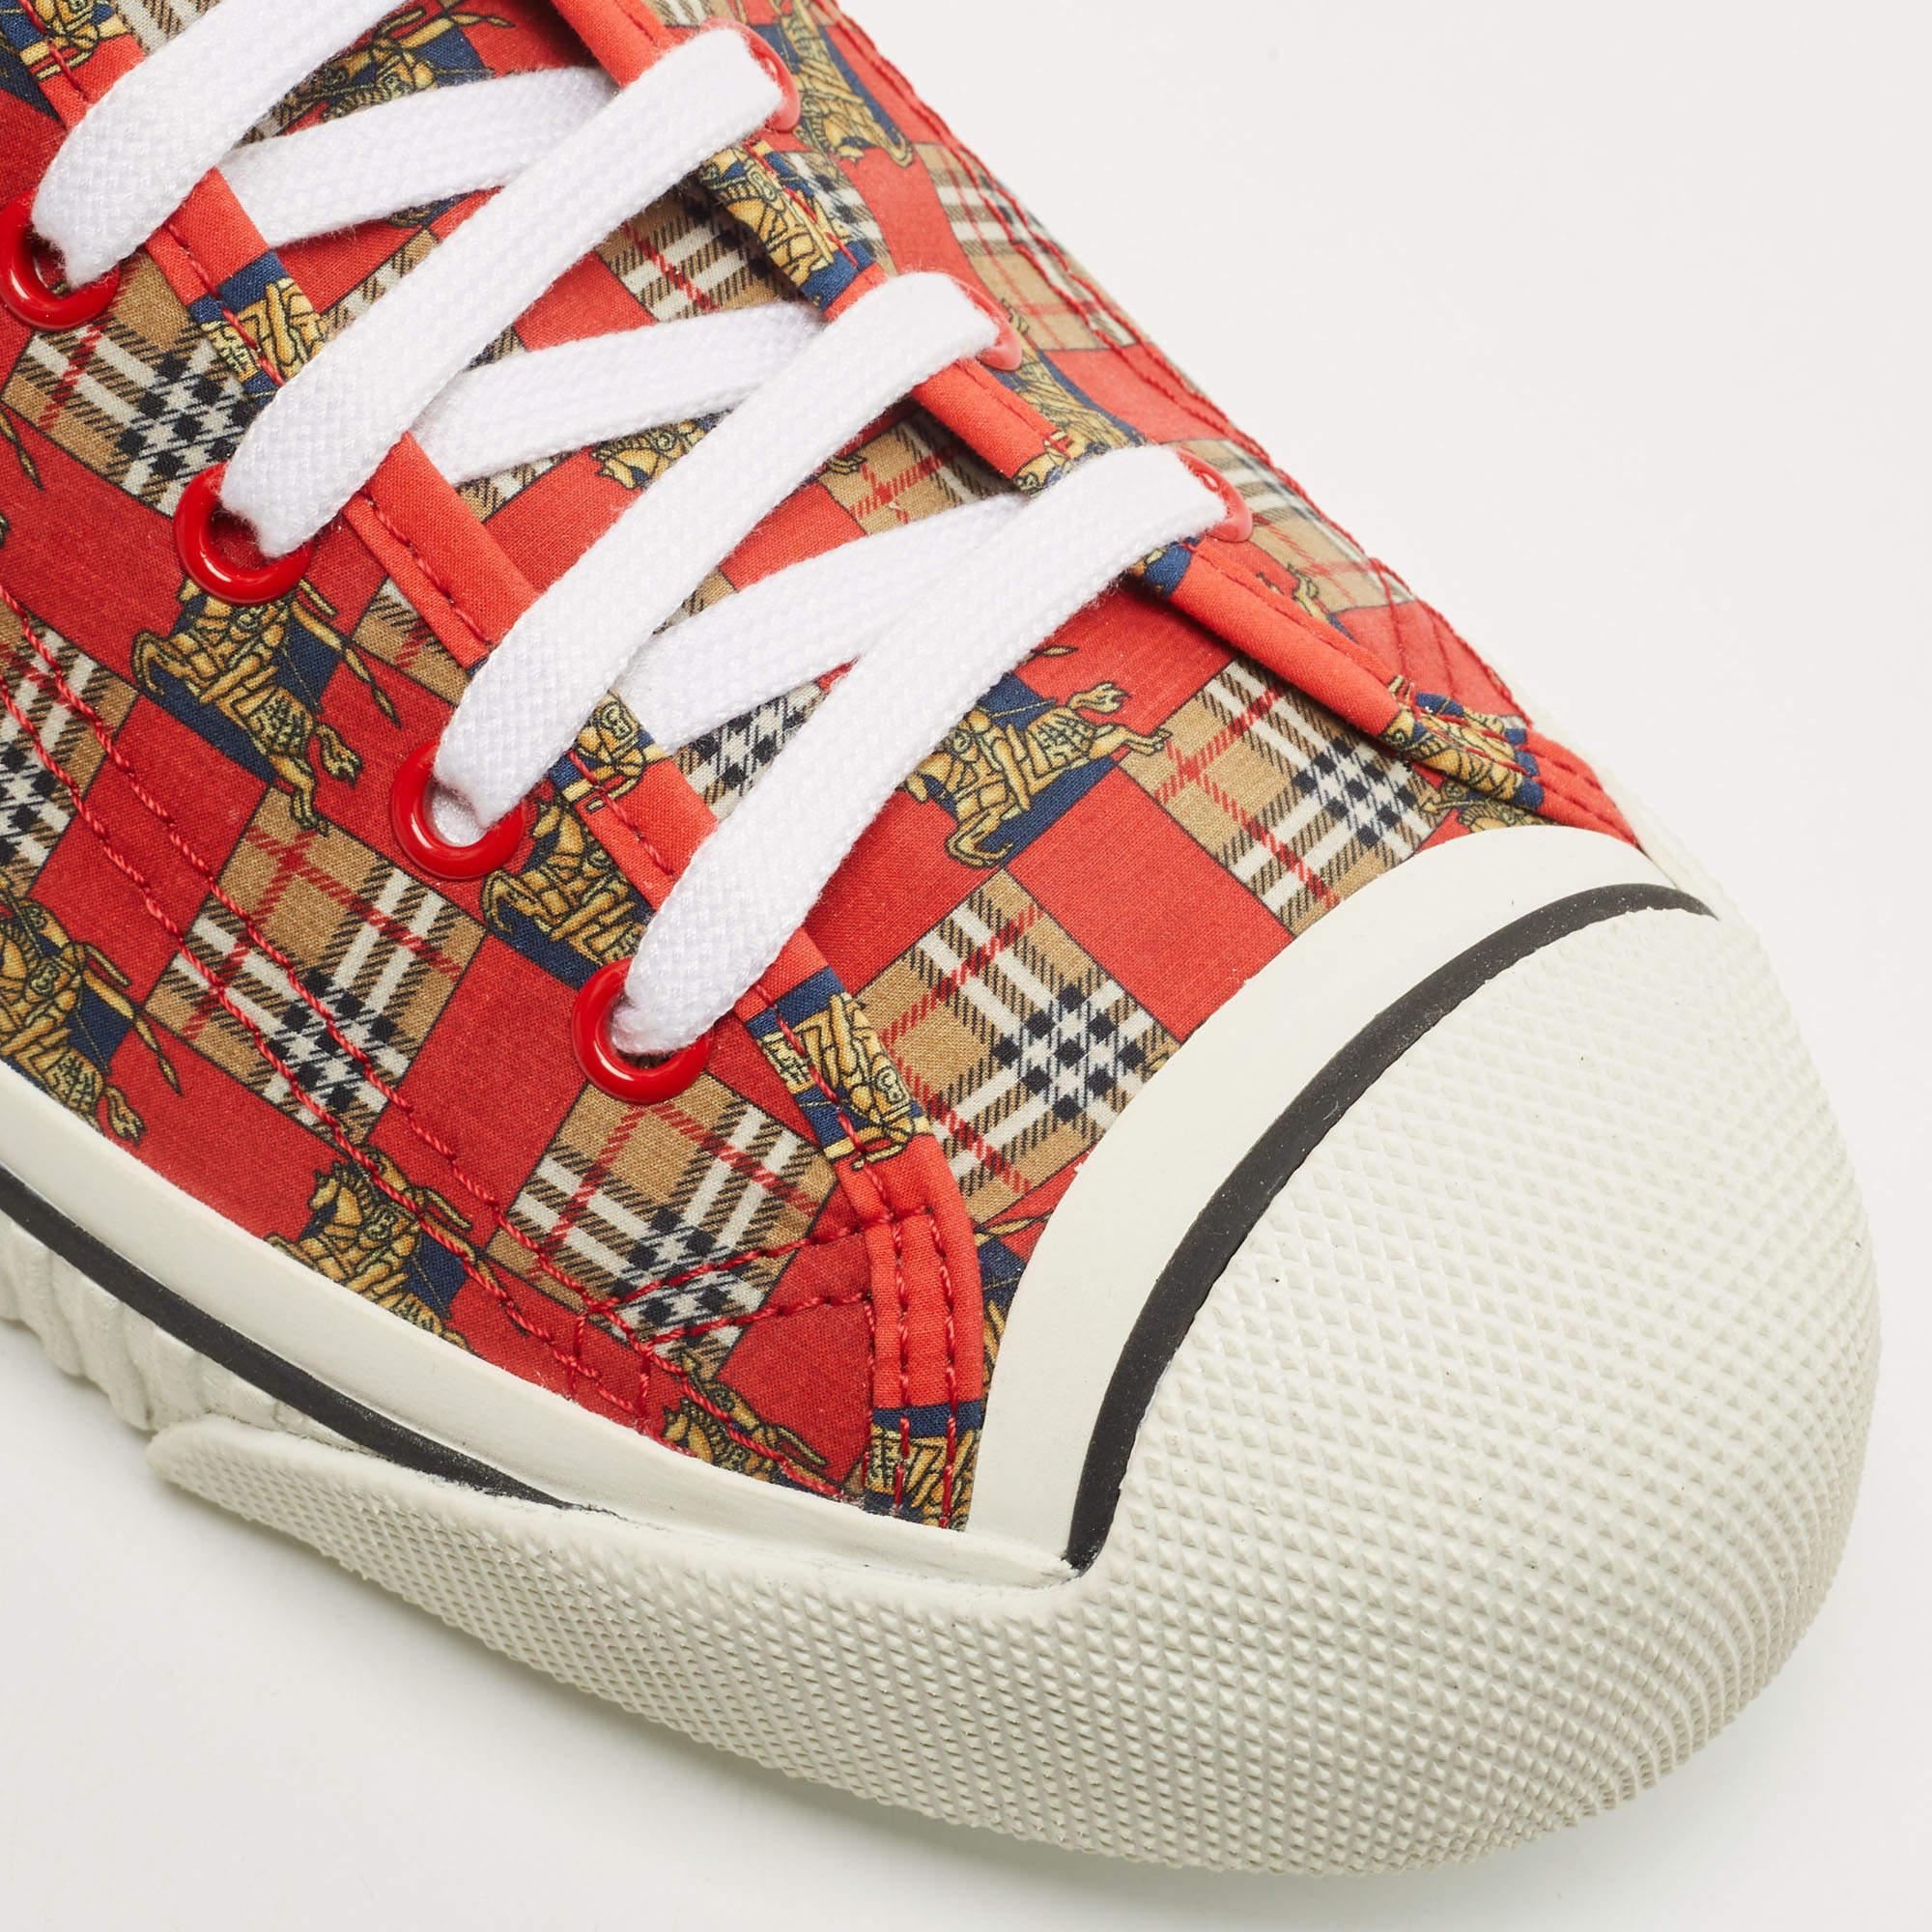 Burberry Red Check Fabric Kingly High Top Sneakers Size 45 2